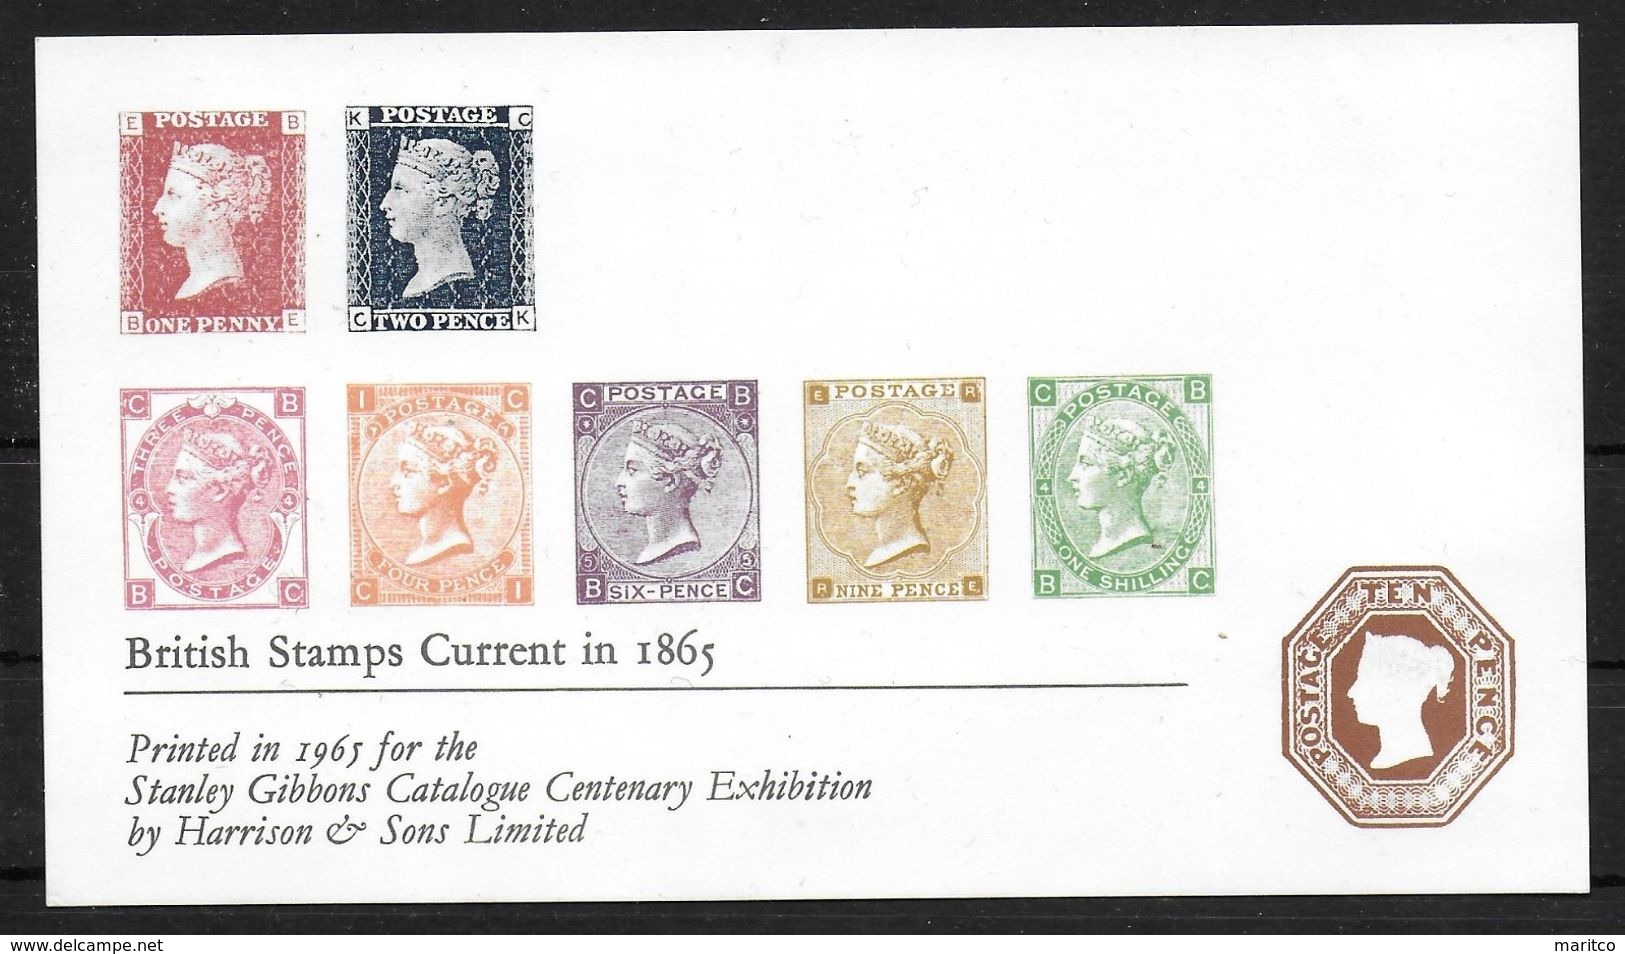 U.K. Card For The 1965 Stanley Gibbon Catalogue Centanary Exhibition  Reprints Of The 1865 Stamps Of GB - Essays, Proofs & Reprints